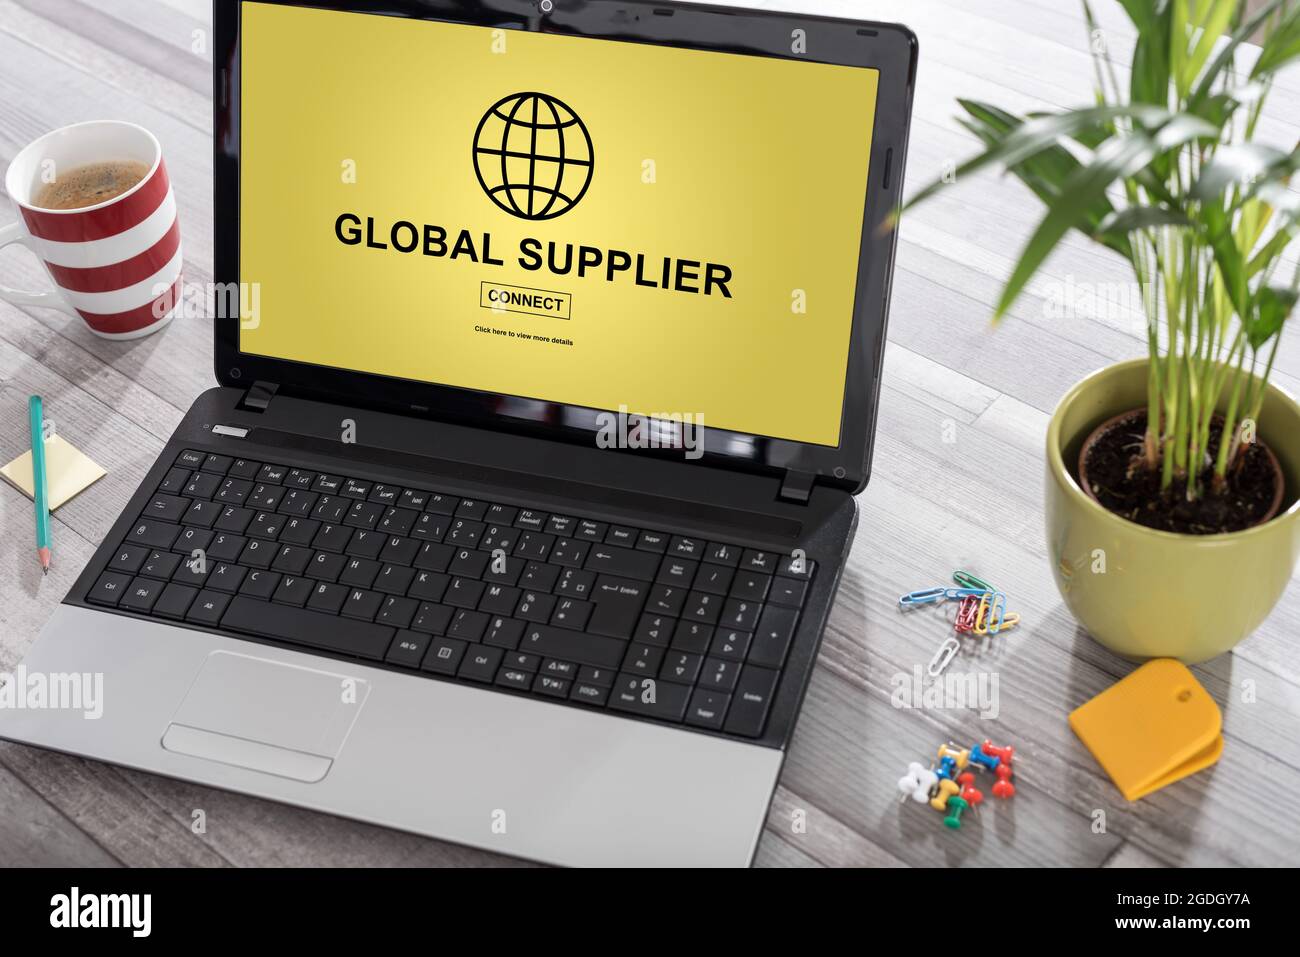 Laptop on a desk with global supplier concept on the screen Stock Photo